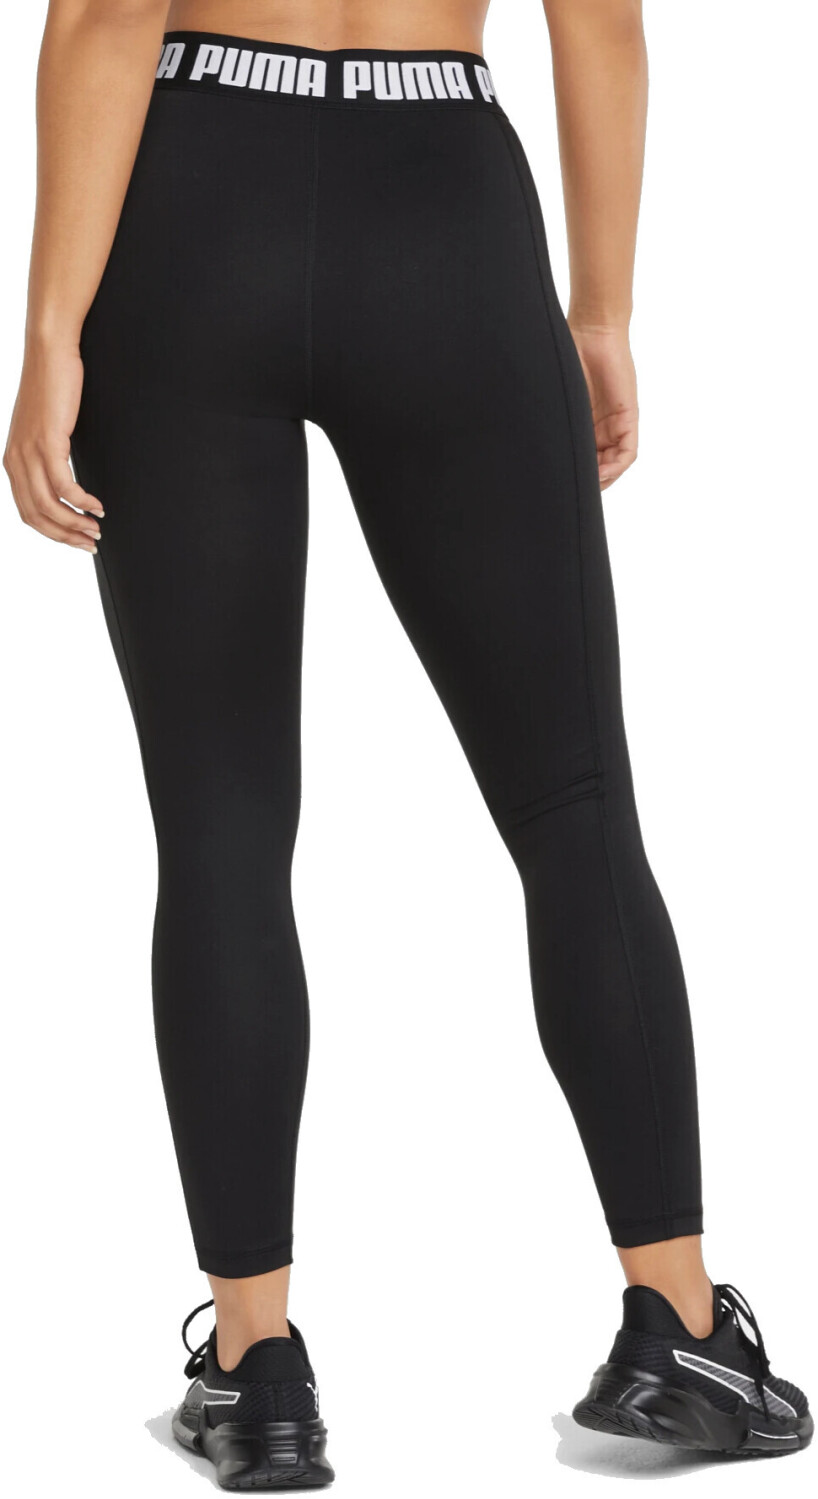 Buy Puma Leggings Strong High Waist Full (521601) puma black from £10.00  (Today) – Best Deals on